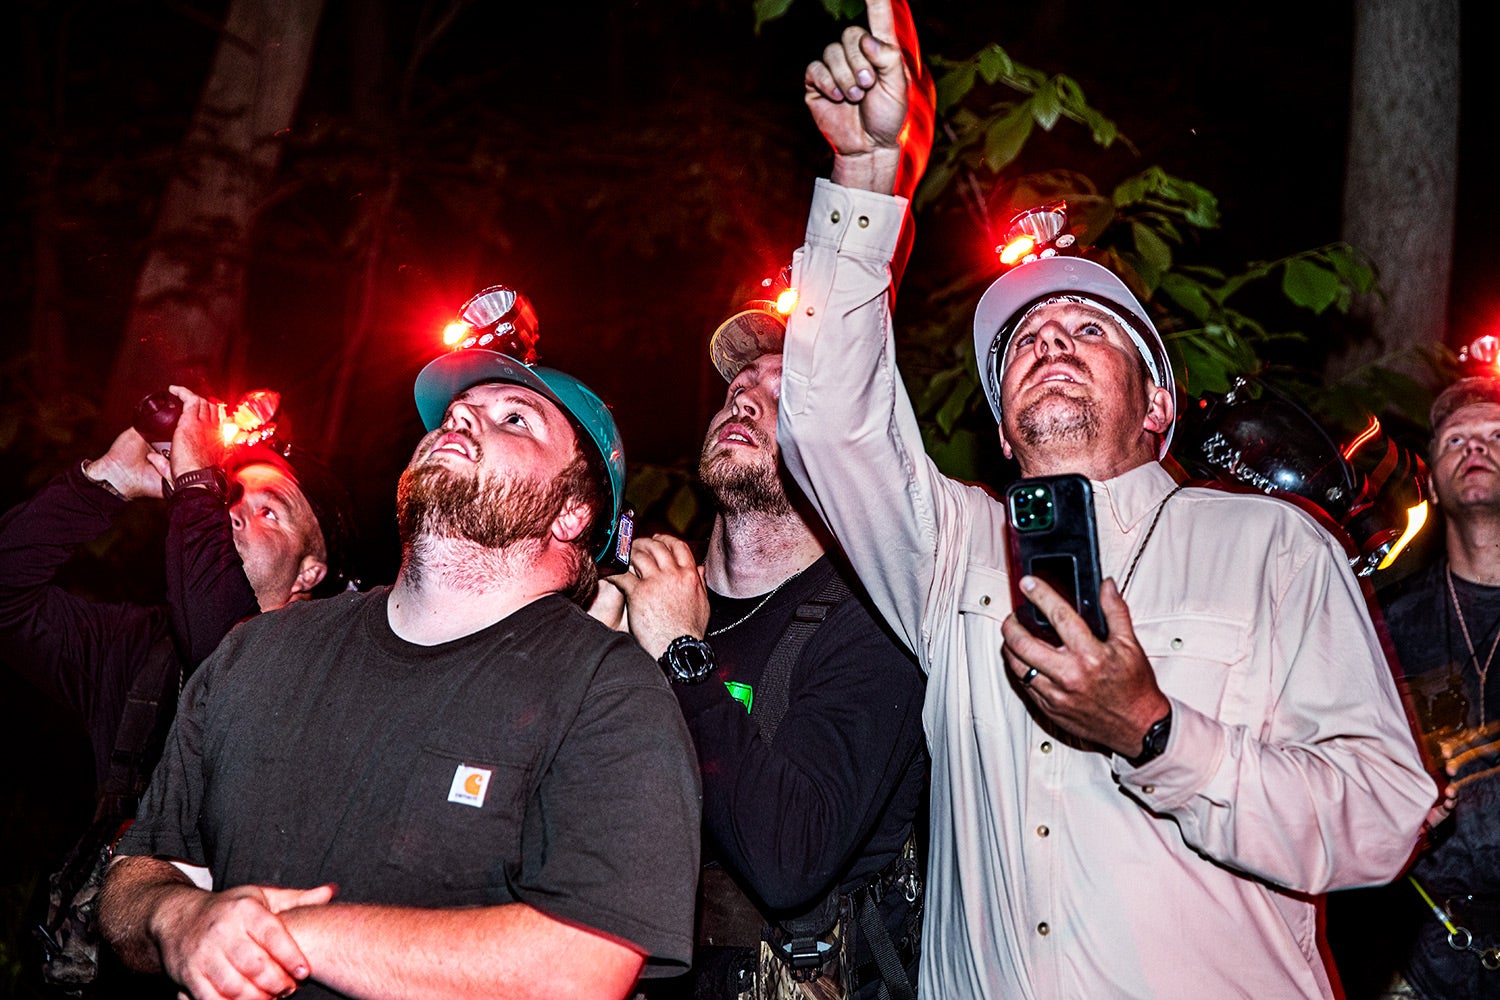 men with headlamps peer and point up into tree in woods at night